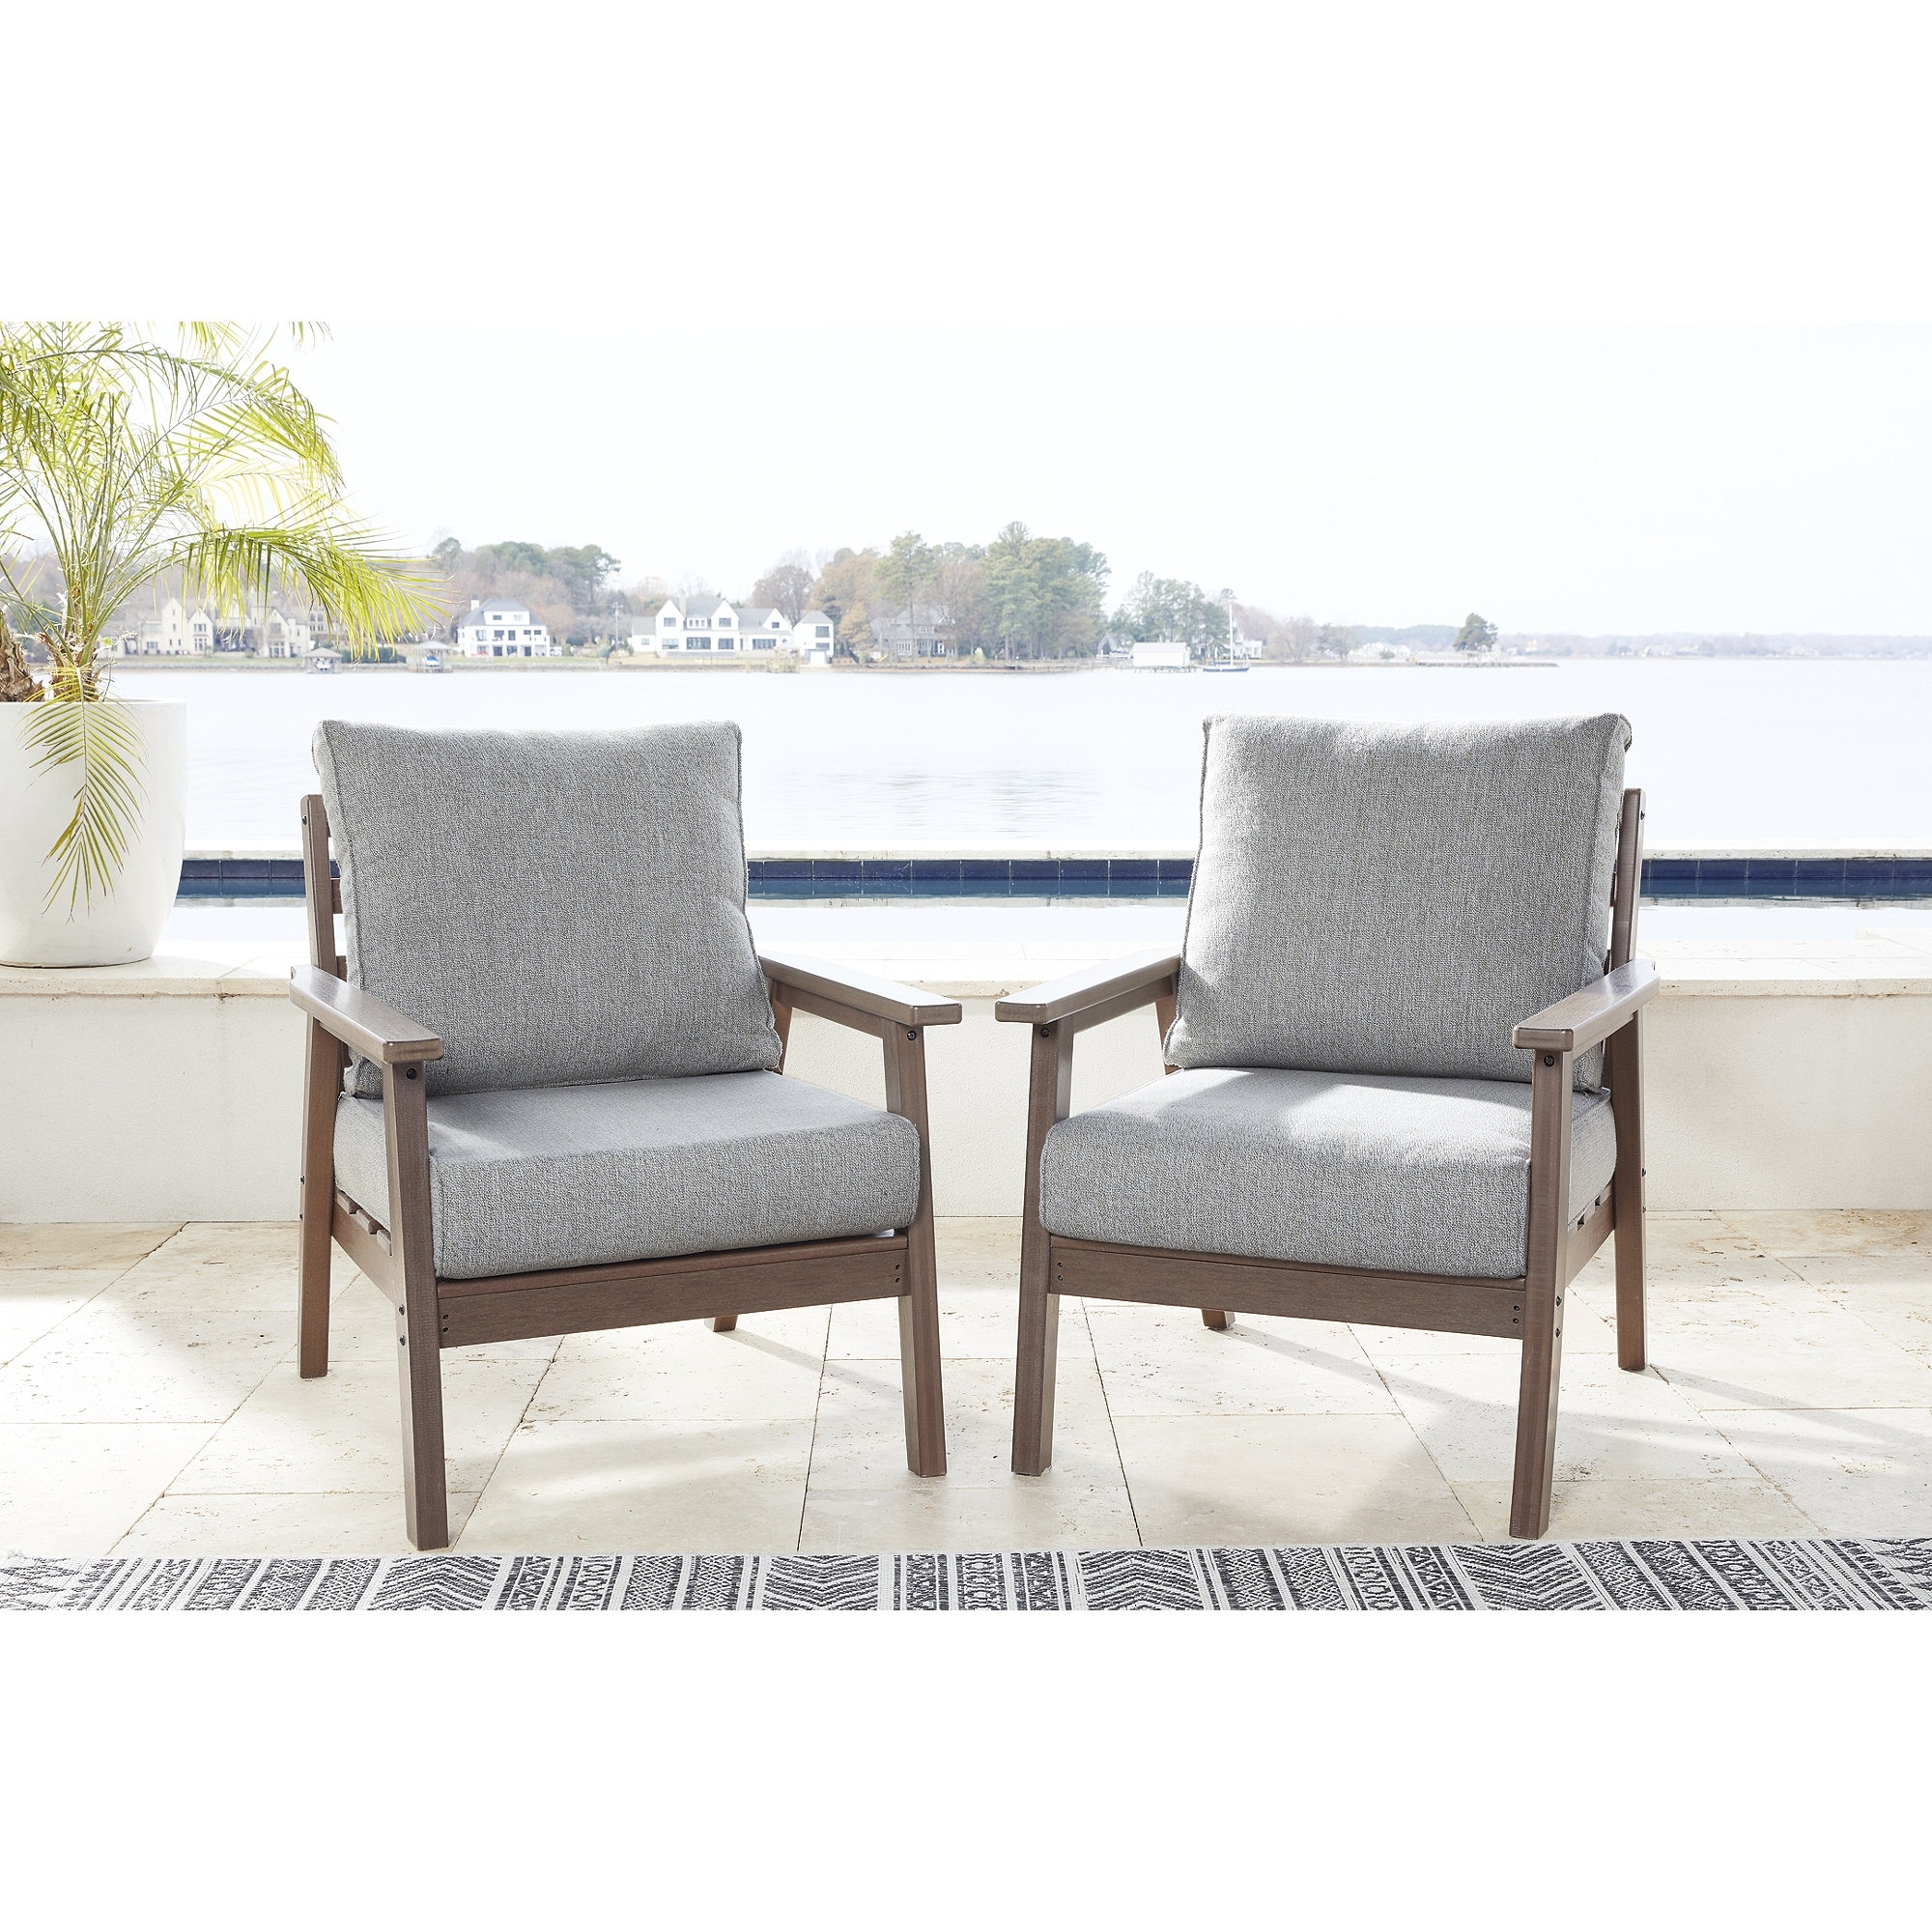 Signature Design By Ashley Emmeline Outdoor Poly All Weather Lounge Chair With Cushion  Set Of 2 - 32w X 34d X 34h